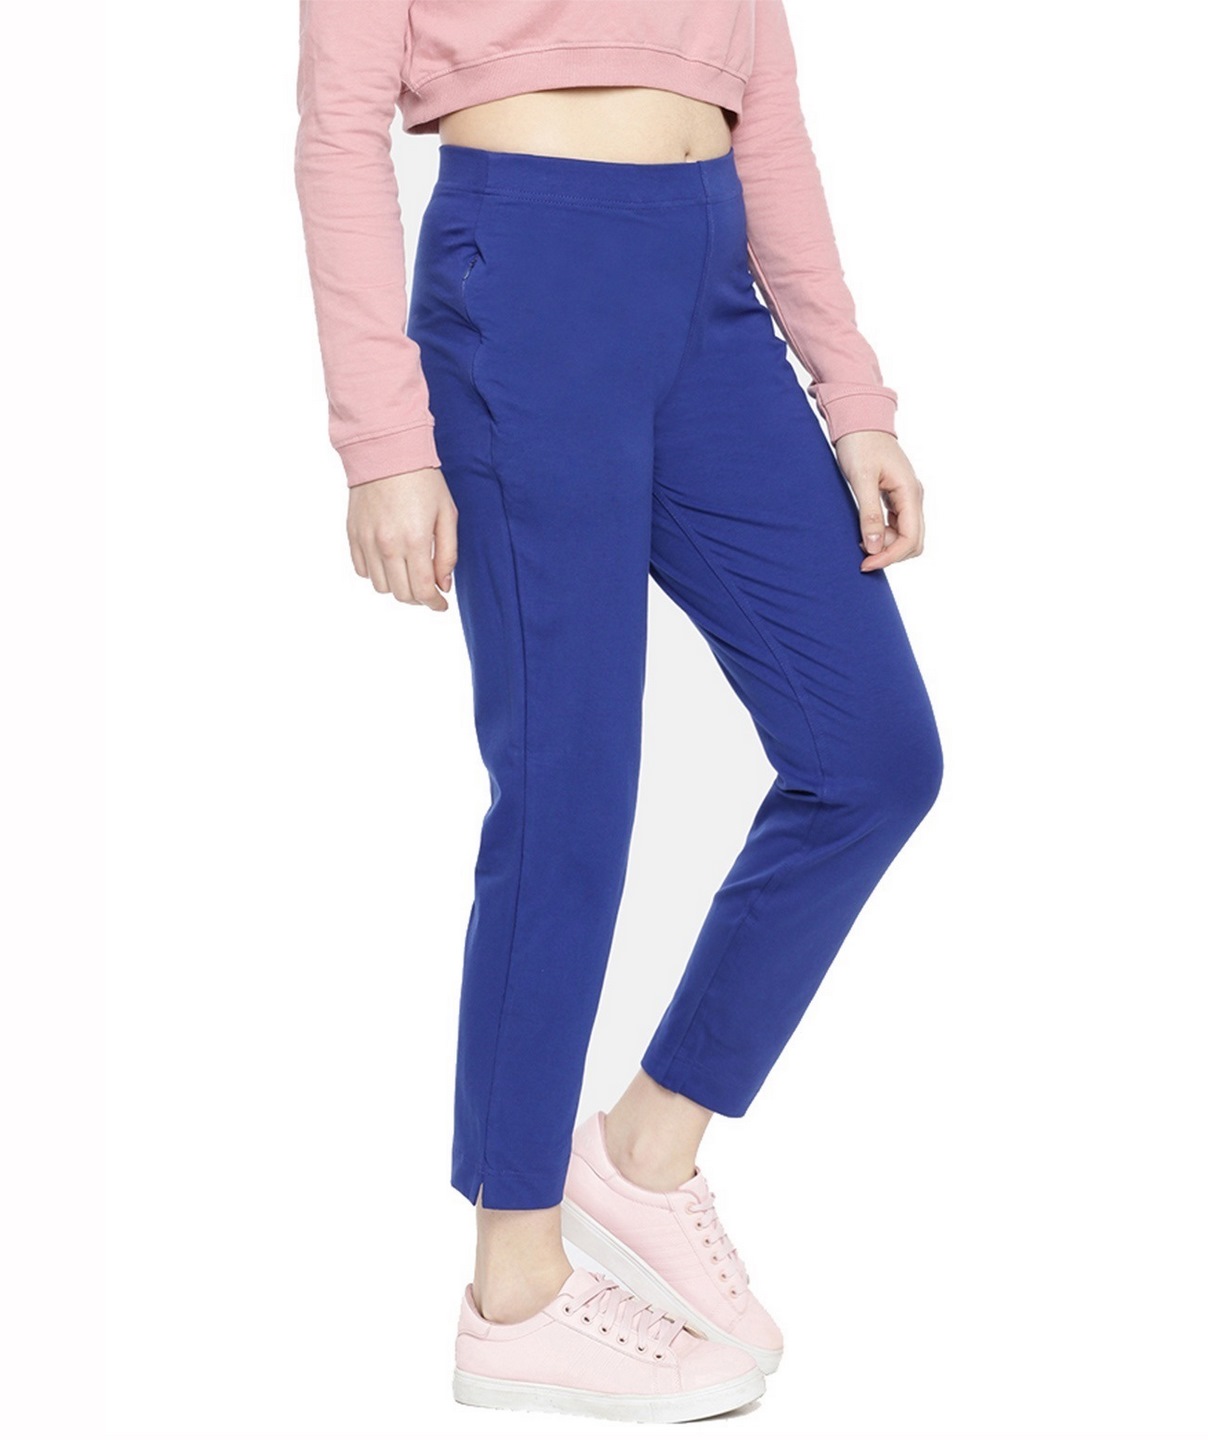 Buy Dollar Missy Women's Cotton Slim Fit Ink Blue Black Ankle Length  Leggings Online at Low Prices in India - Paytmmall.com